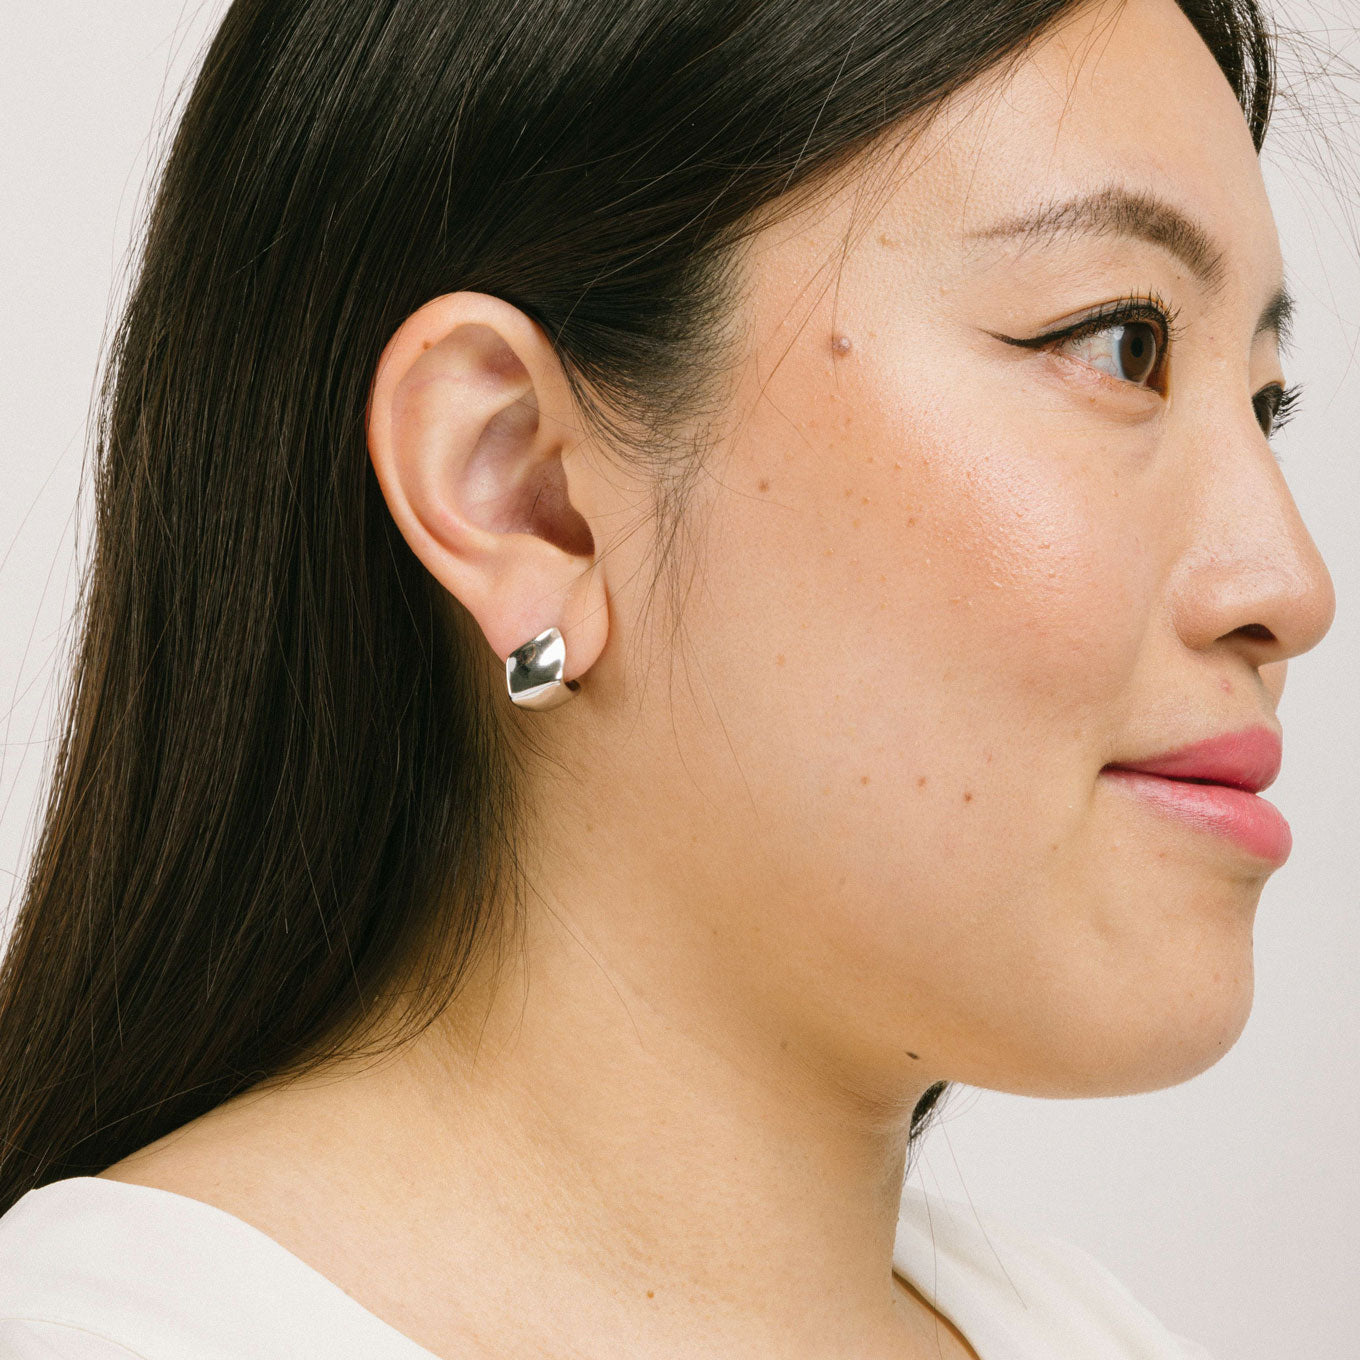 A model wearing the Spritz Clip On Earrings feature a Mosquito Coil Clip-On closure suitable for all ear types, offering a medium secure hold and adjustable comfort. On average, these earrings can be comfortably worn up to 24 hours. Constructed of Silver Toned Copper Alloy, one pair is included.